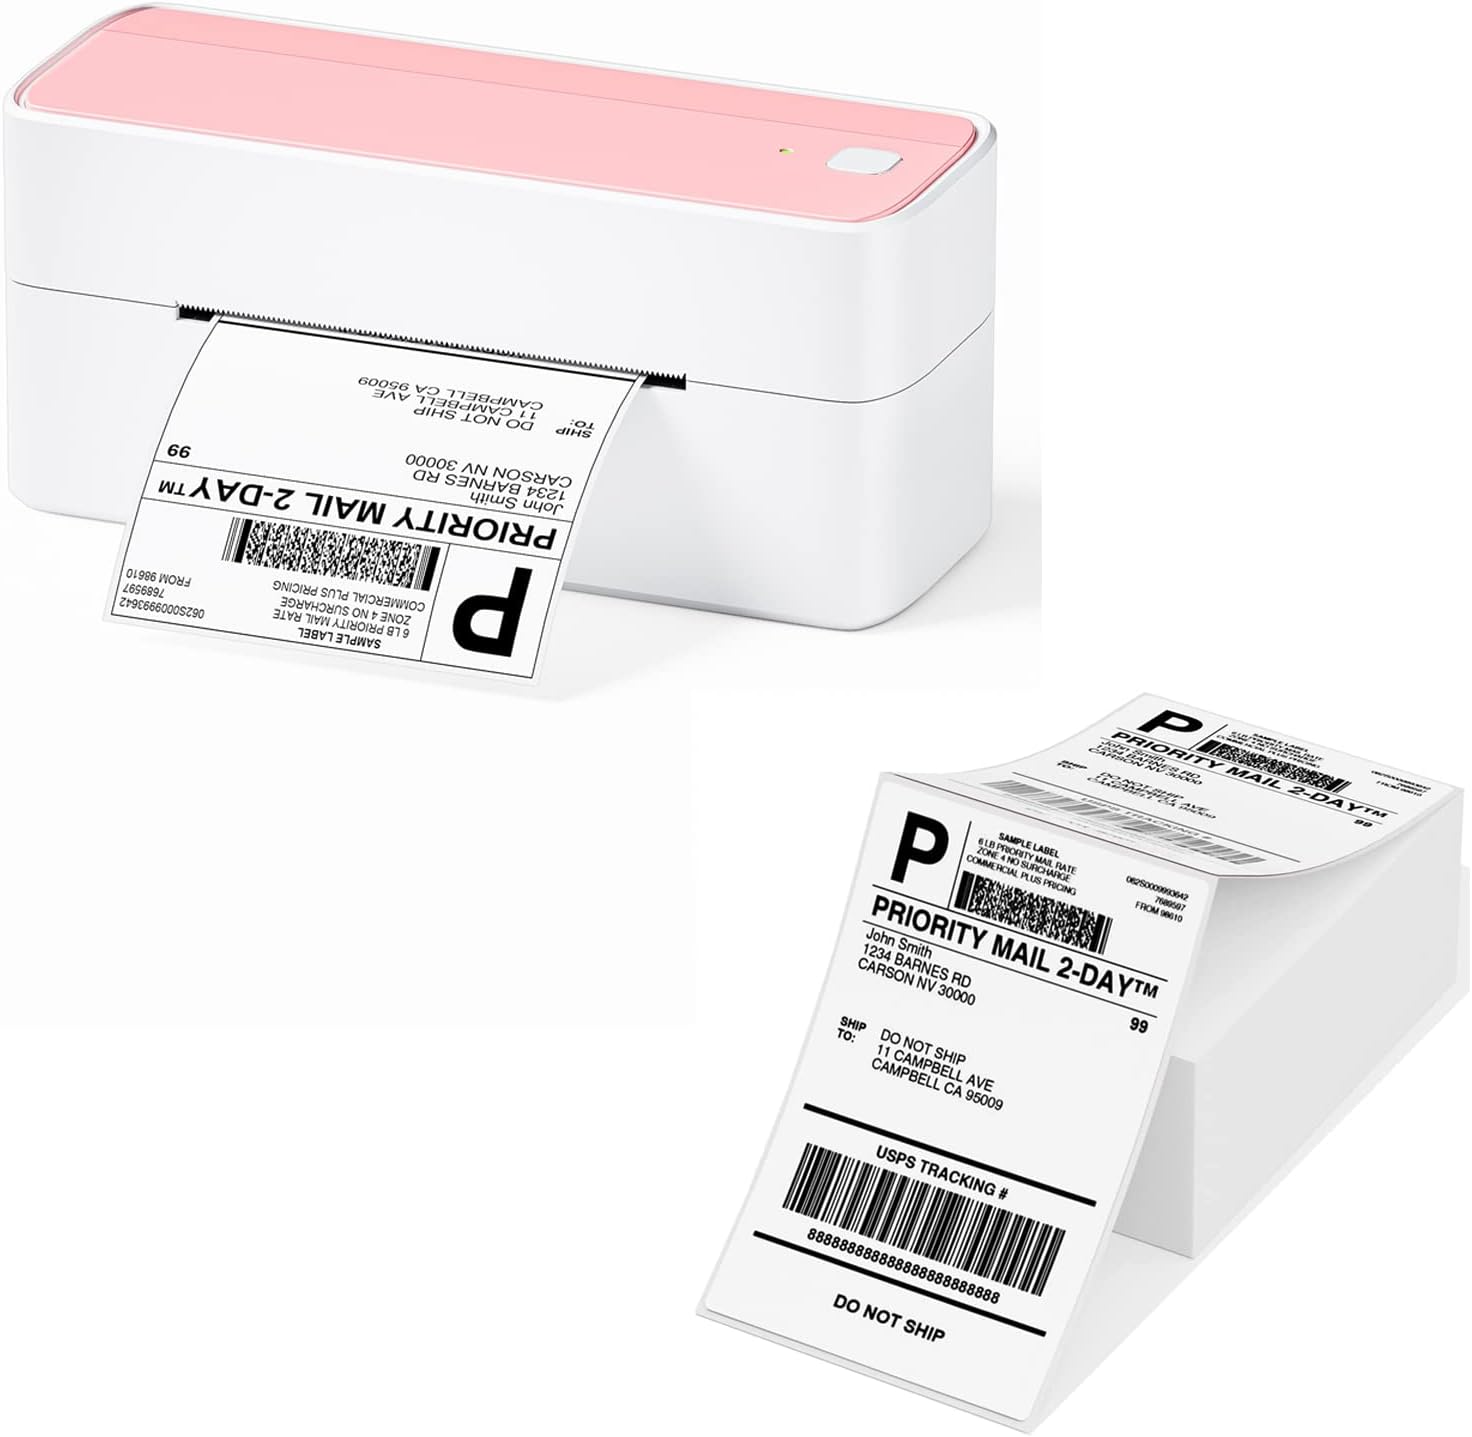 Phomemo 241BT Bluetooth Thermal Shipping Label Printer 4X6 - Wireless Thermal Label Printer for Shipping Packages + 4